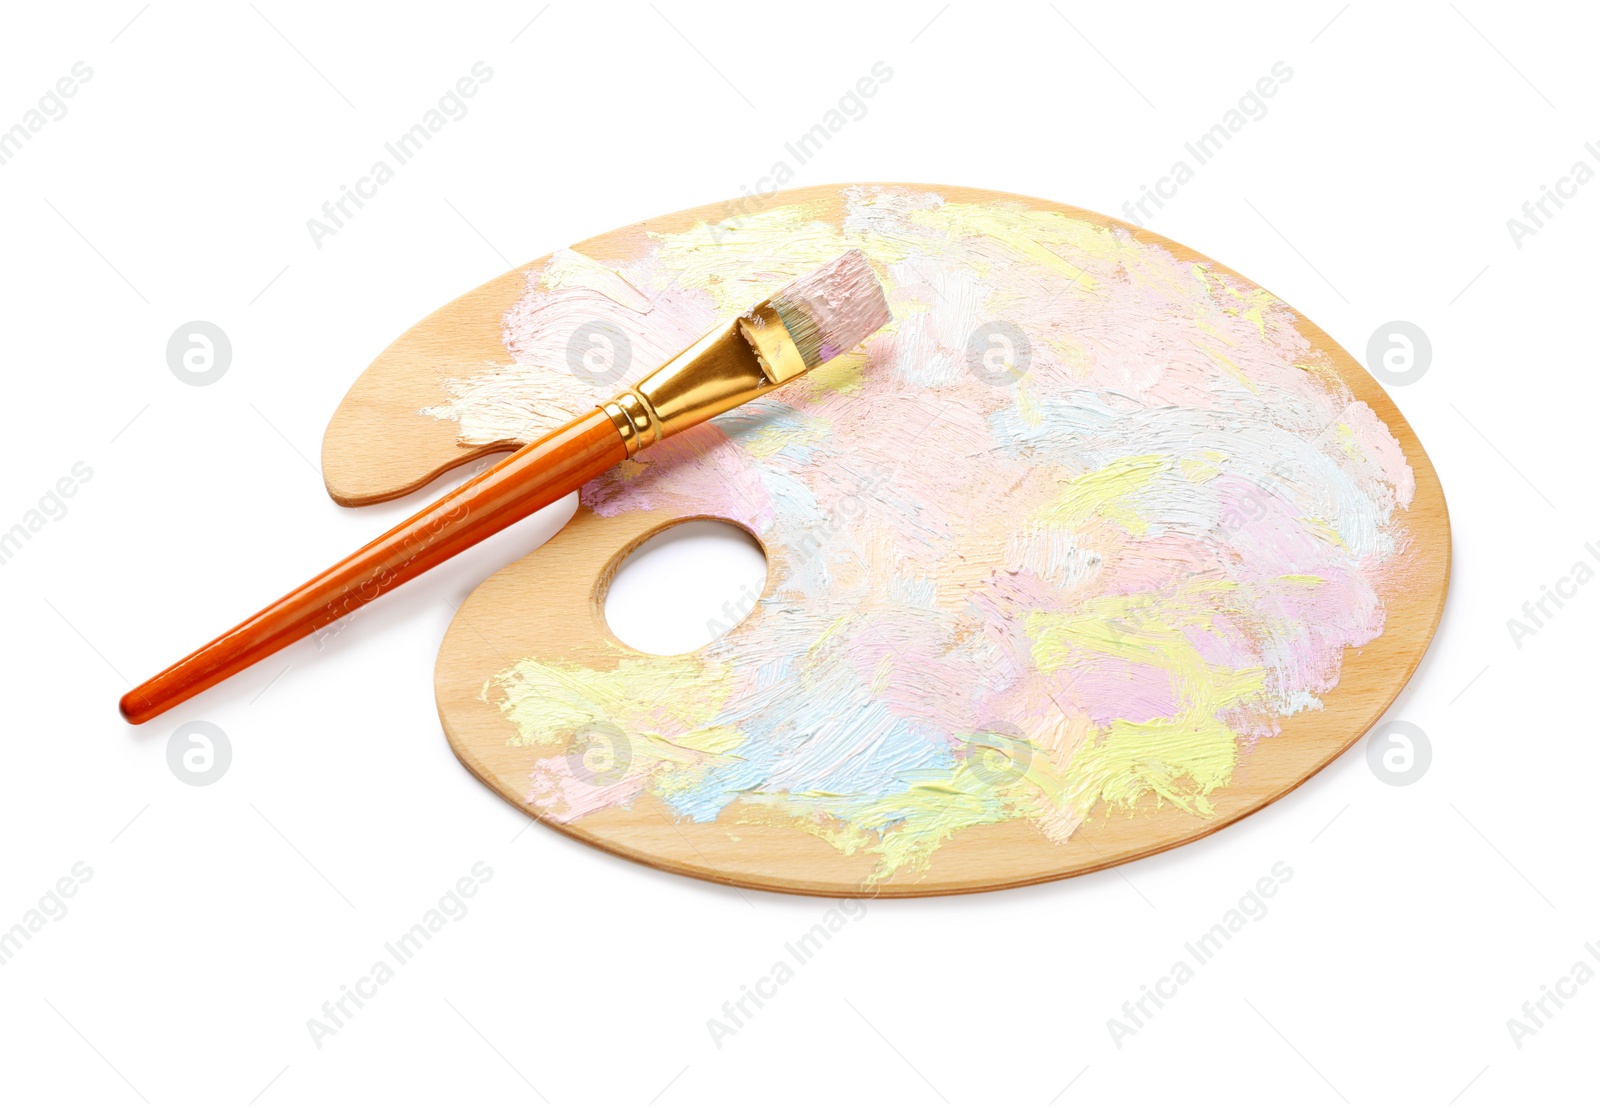 Photo of Wooden artist's palette with mixed pastel paints and brush isolated on white